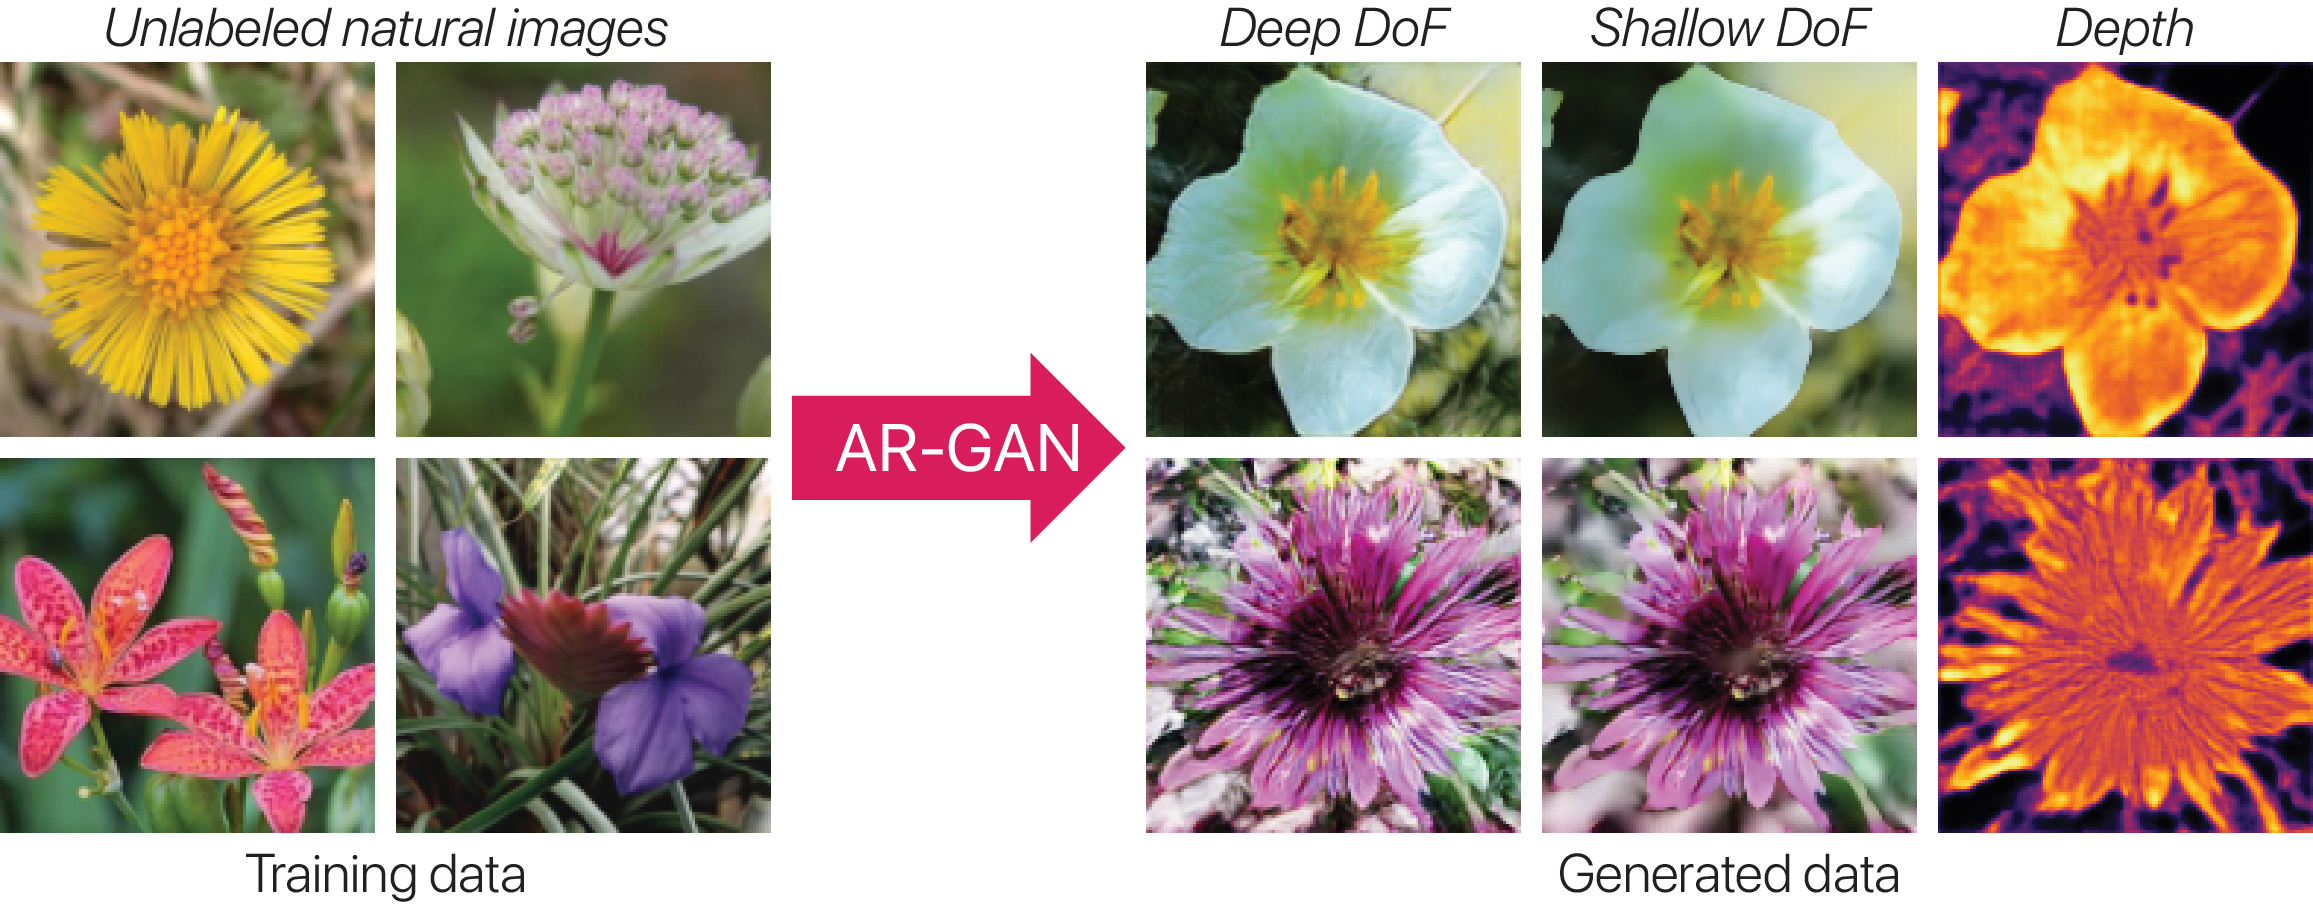 Unsupervised learning of depth and DoF effect from unlabeled natural images